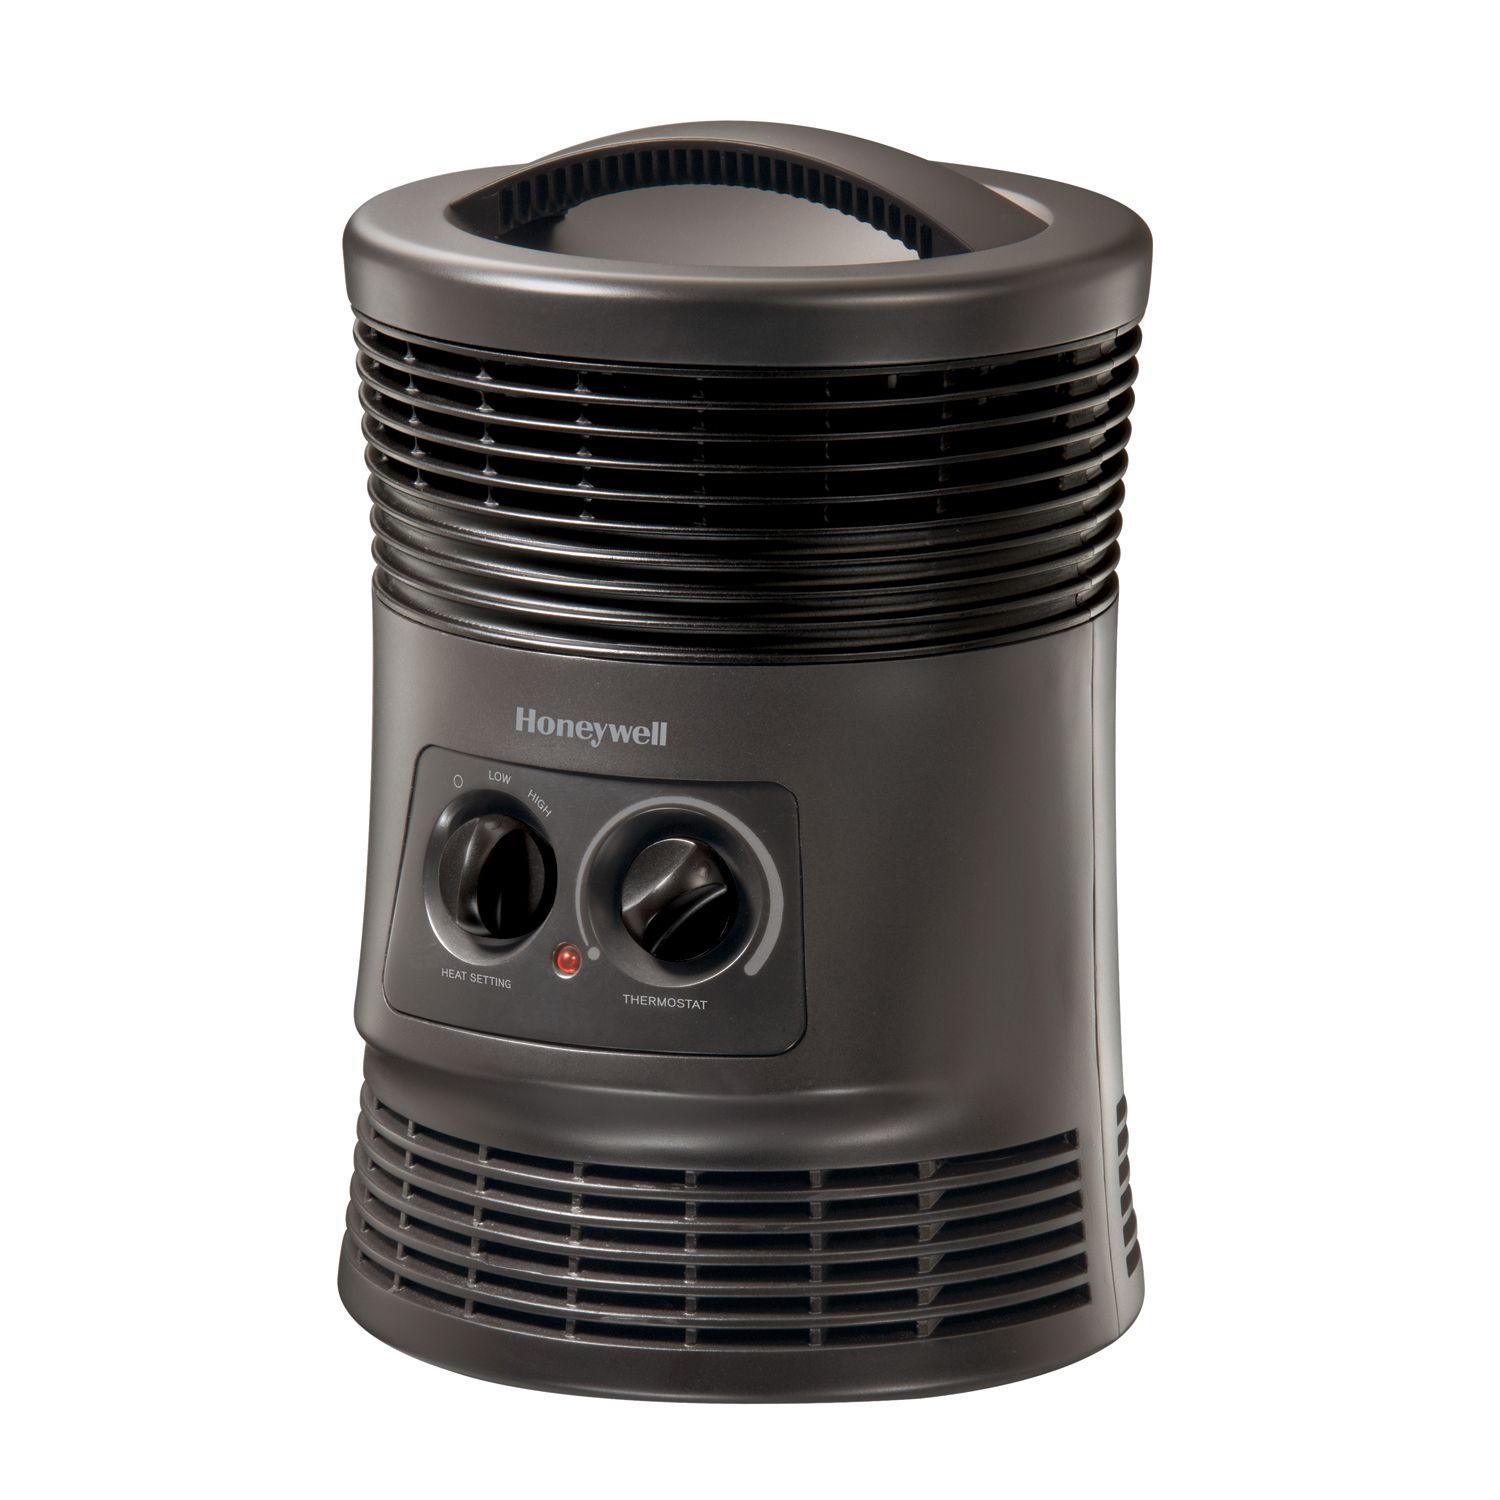 Image for Honeywell 360 Surround Space Heater at Kohl's.